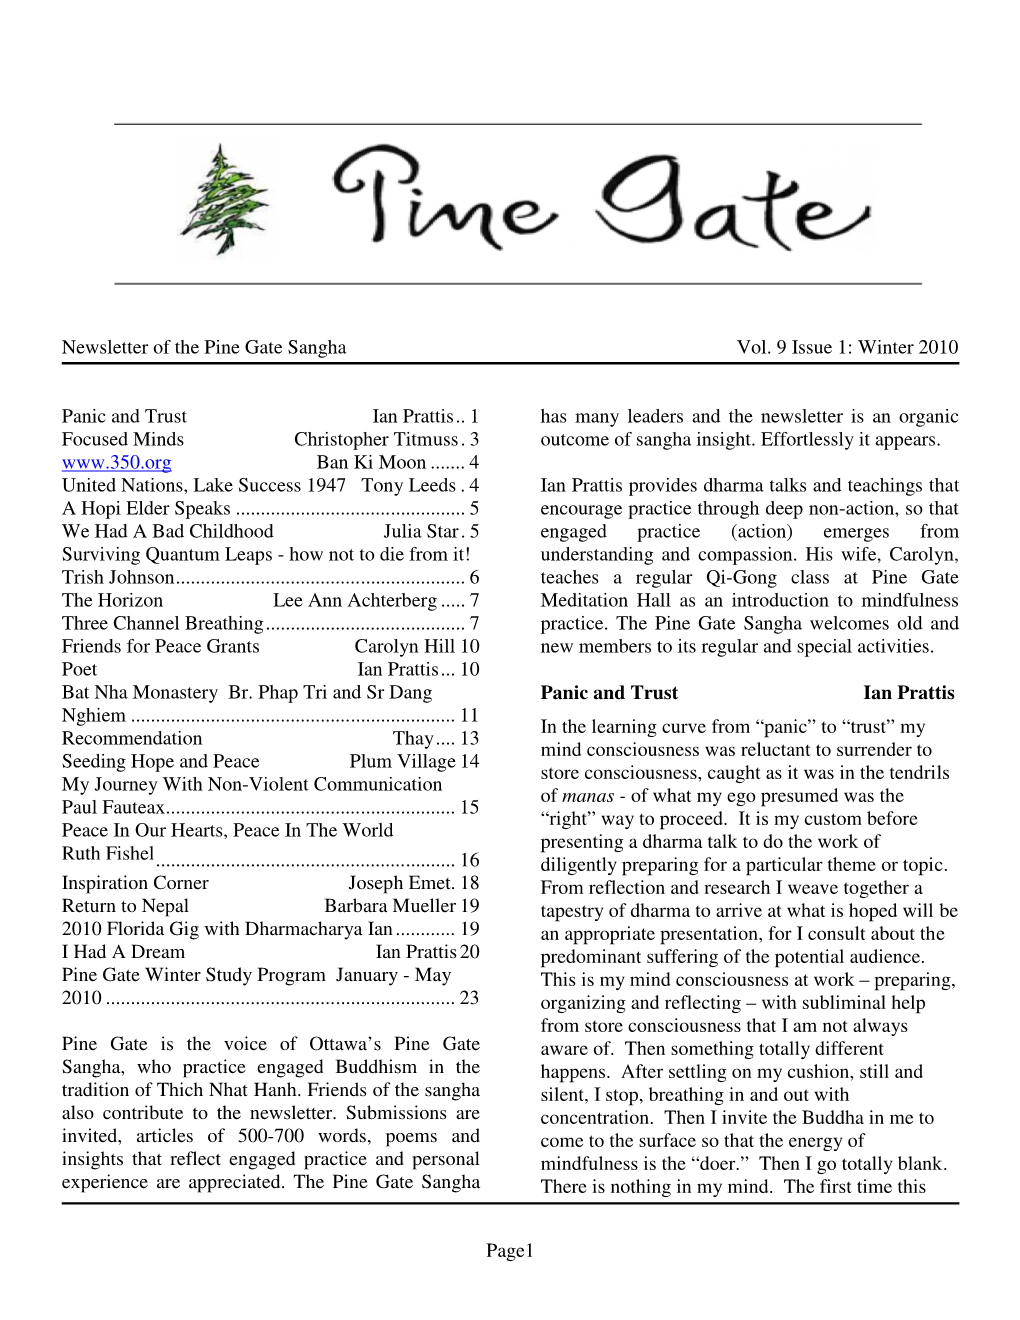 Newsletter of the Pine Gate Sangha Vol. 9 Issue 1: Winter 2010 Page1